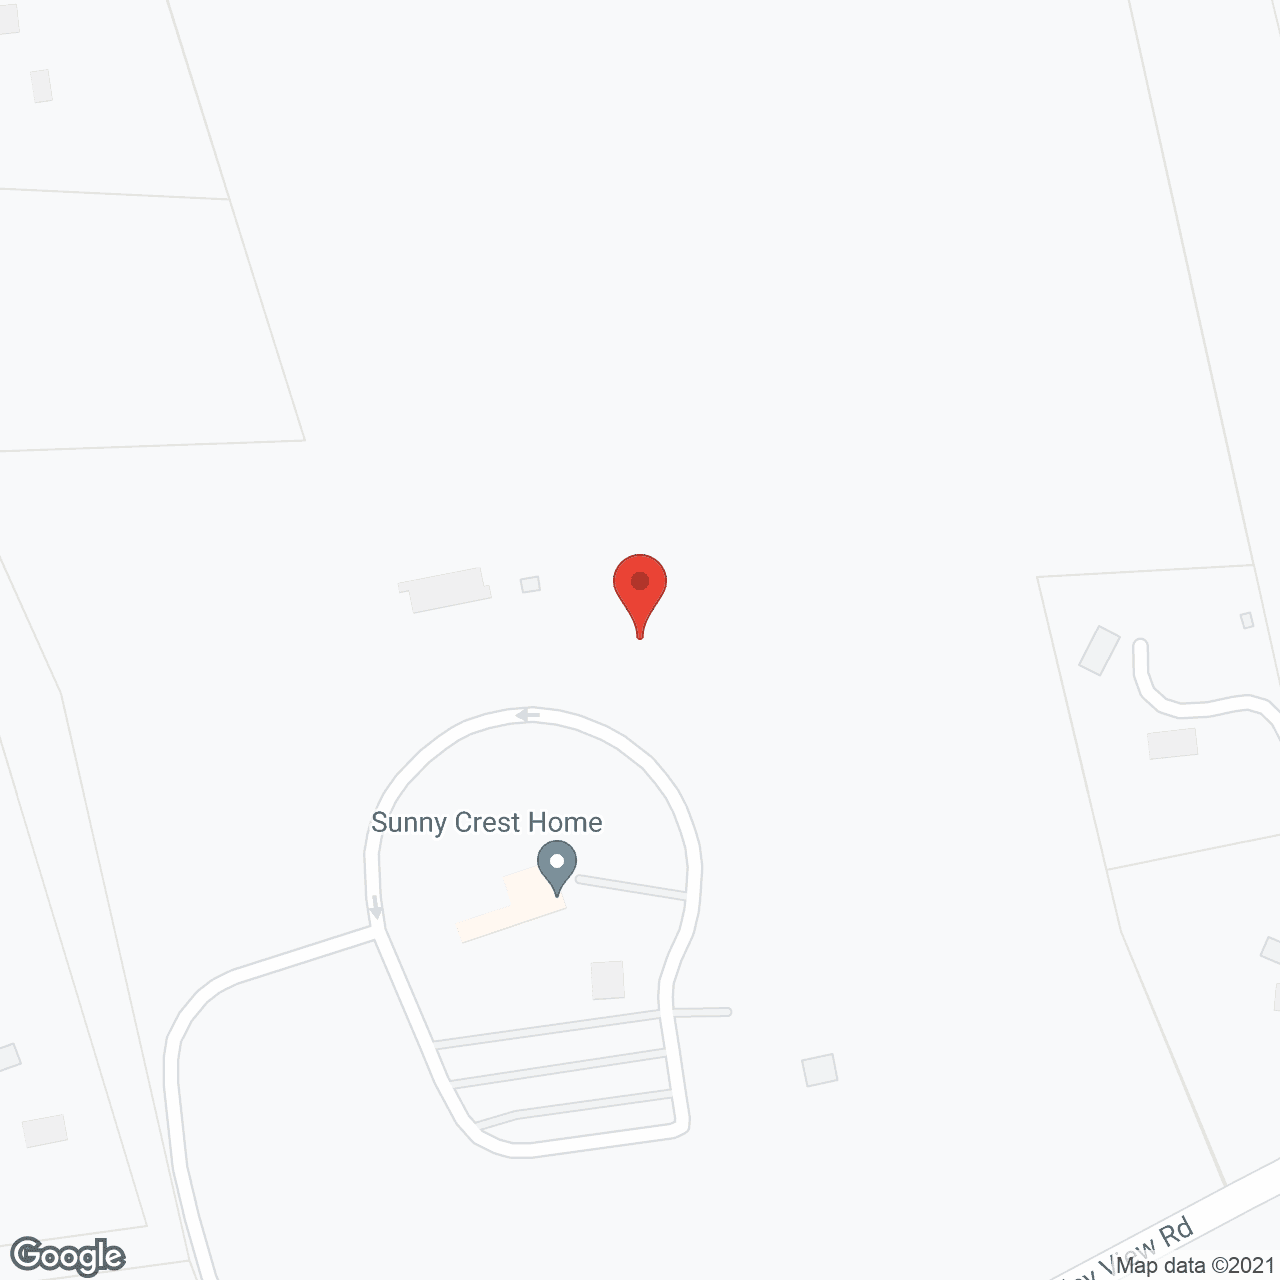 Sunny Crest Home, Inc. in google map